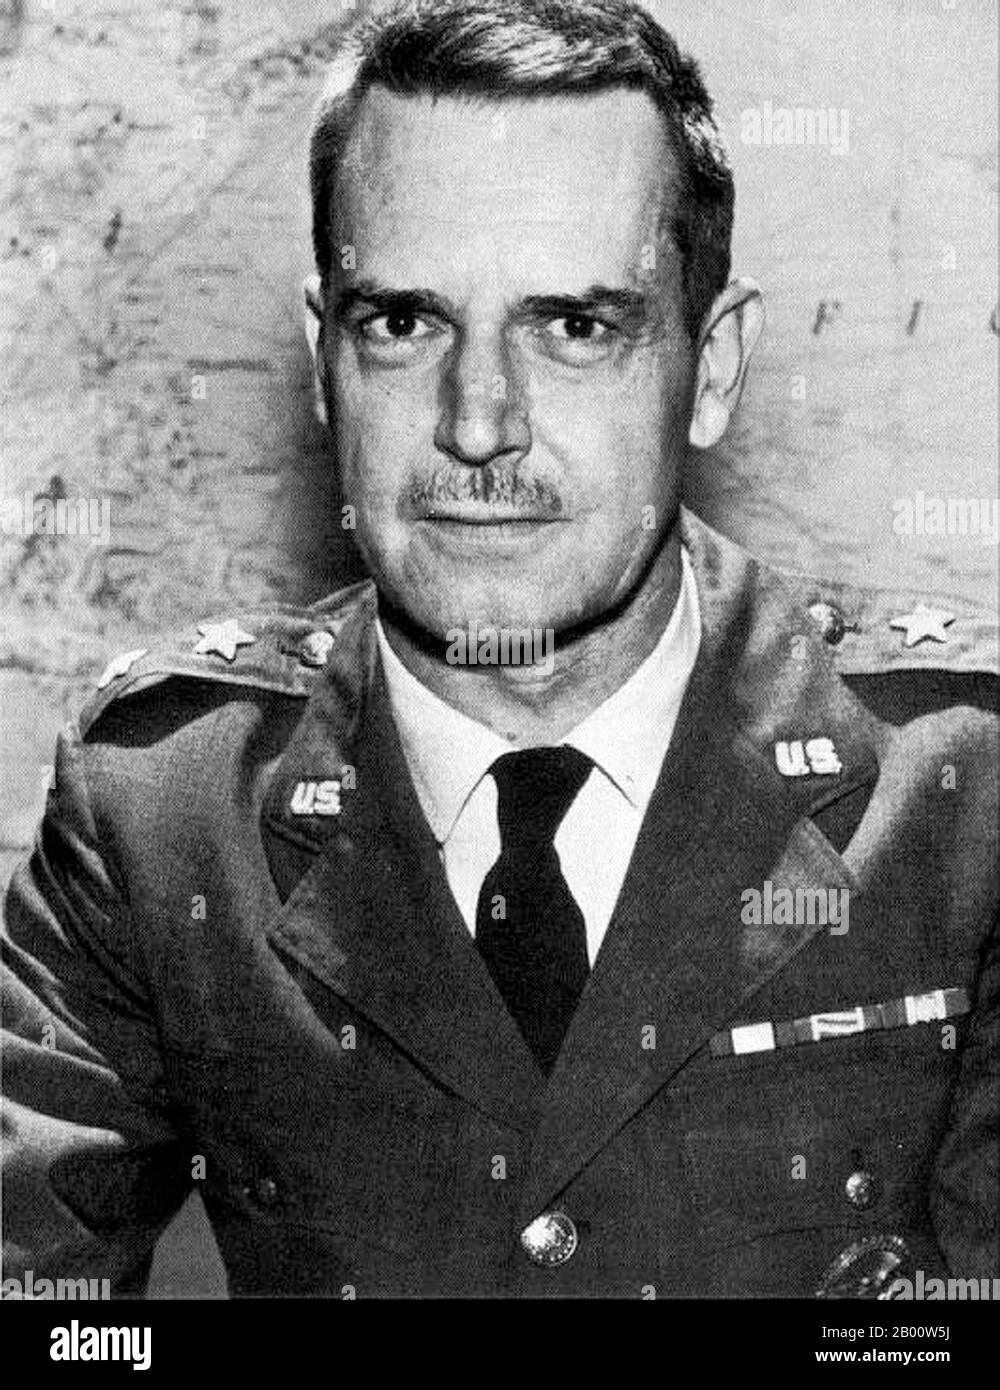 USA: Major General Edward Geary Lansdale (1908-1987), considered by some to have been the model for Graham Greene's 1955 novel 'The Quiet American'.  Edward Geary Lansdale (February 6, 1908–February 23, 1987) was a United States Air Force officer who served in the Office of Strategic Services and the Central Intelligence Agency. Lansdale was a member of General John W. O'Daniel's mission to Indo-China in 1953, acting as an advisor on special counter-guerrilla operations to French forces against the Viet Minh. From 1954 to 1957 he was stationed in Saigon as an advisor to South Vietnamese forces Stock Photo